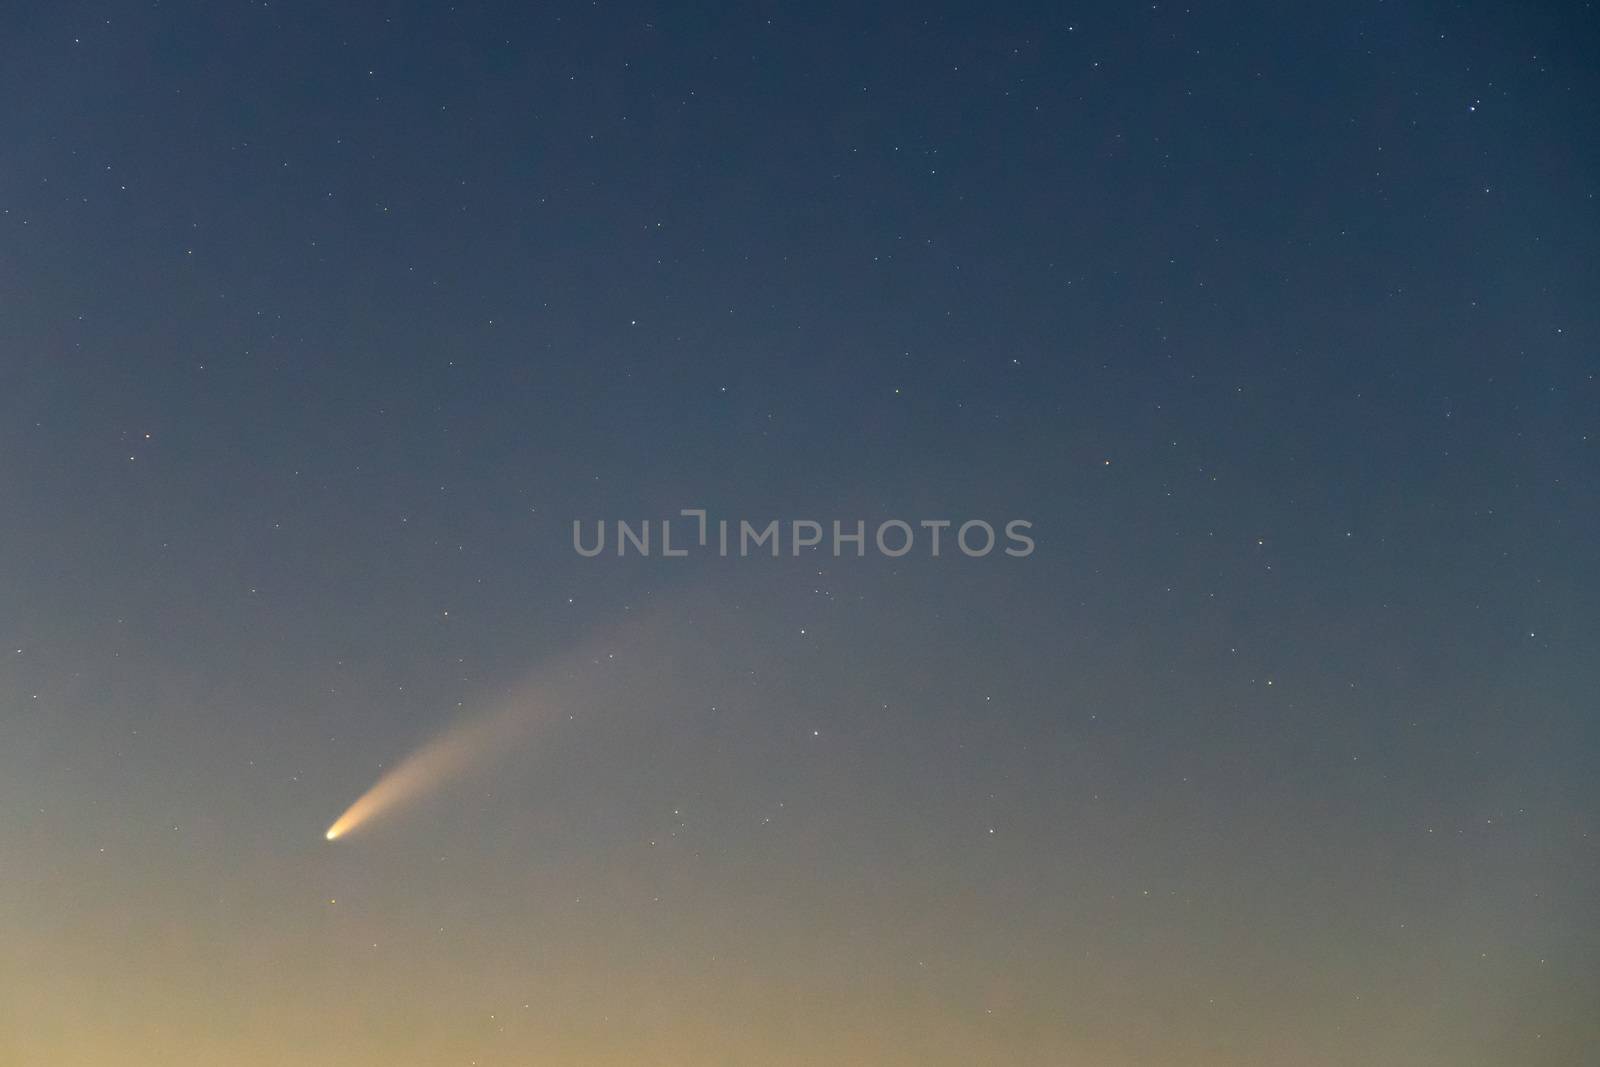 Neowise Comet and its long dust tail after dusk by mauricallari